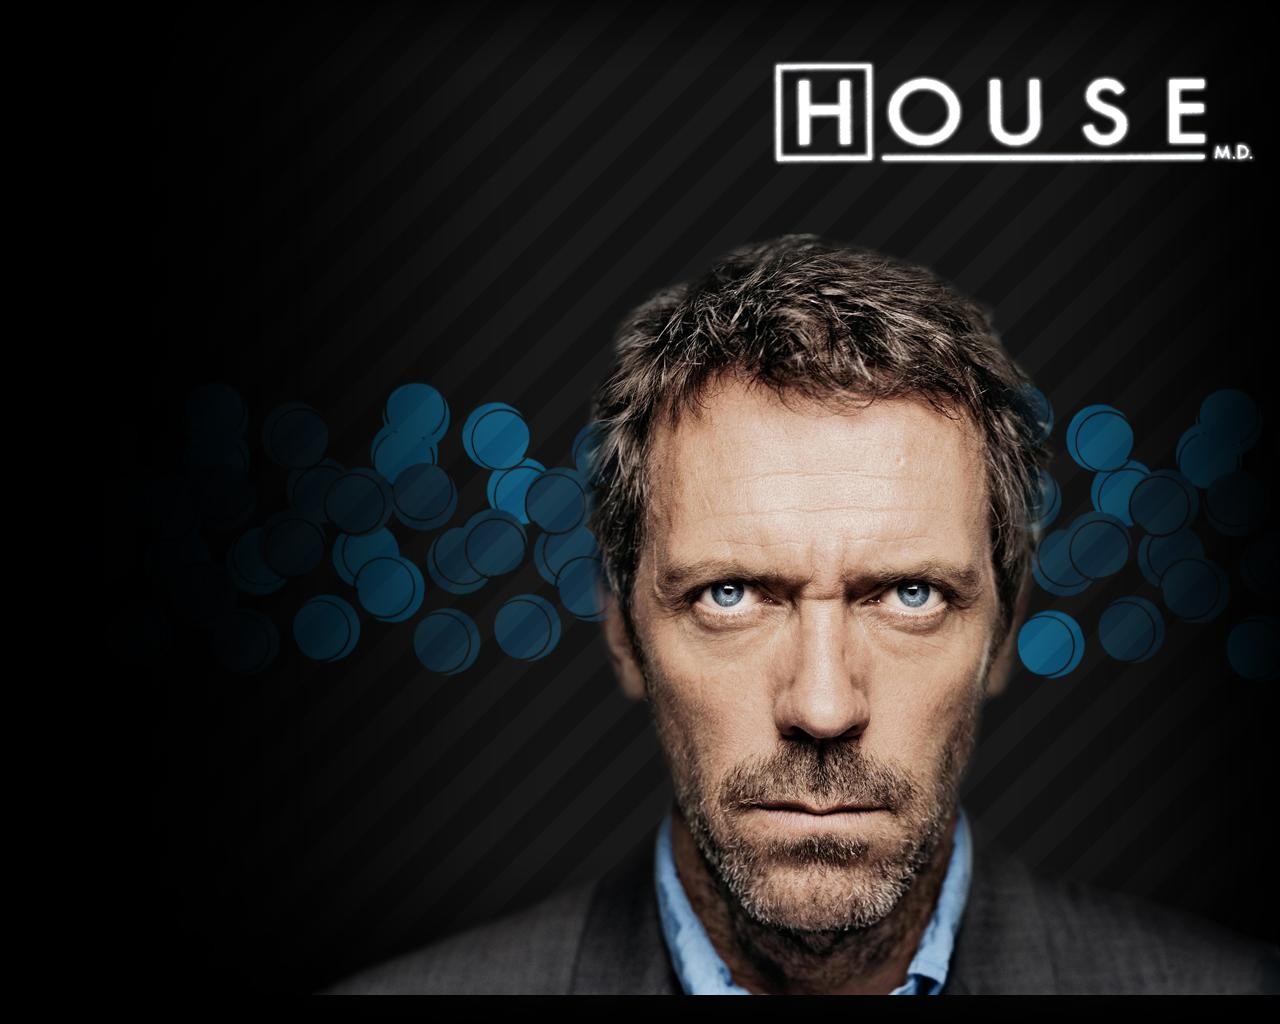 House, M.D., Gregory House Wallpaper